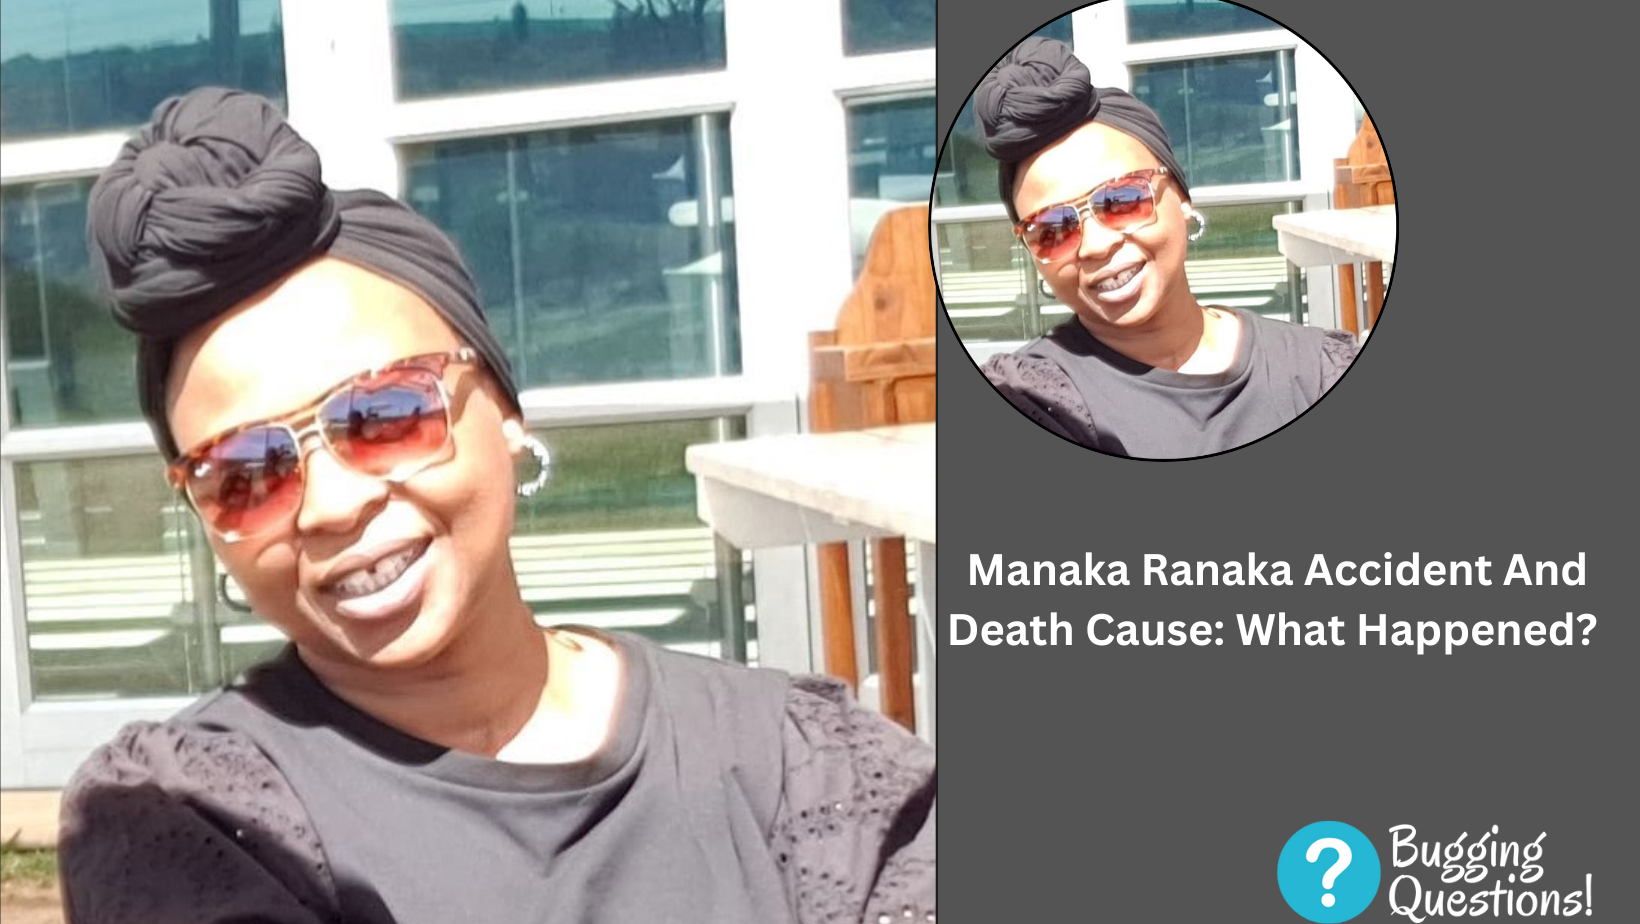 Manaka Ranaka Accident And Death Cause: What Happened?